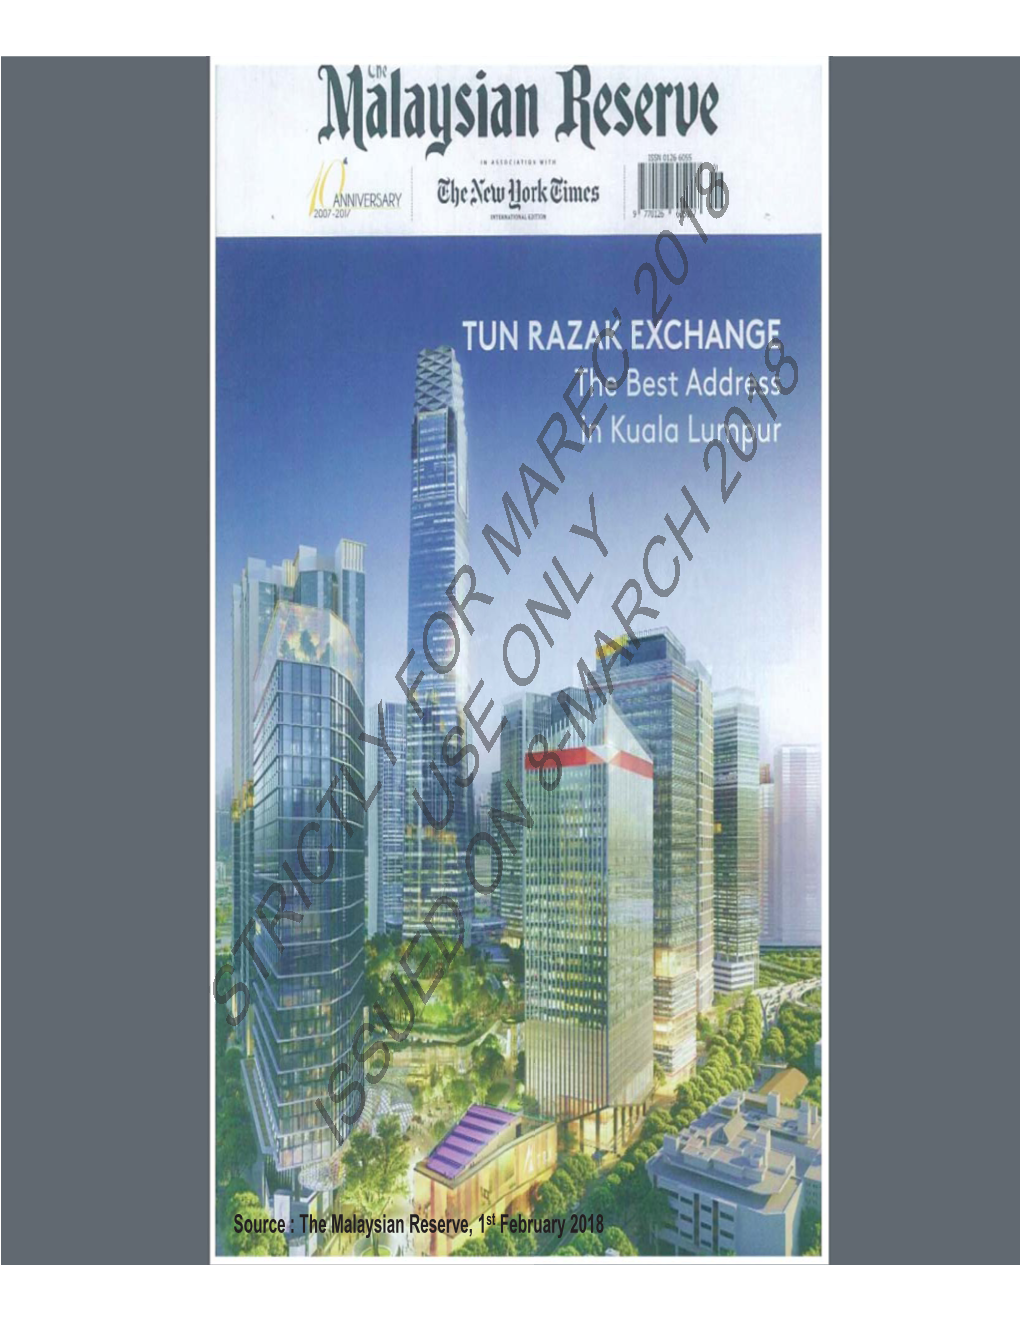 TUN RAZAK EXCHANGEUSE the New Financial City of Kualaon Lumpur Malaysian Annual Real Estate Convention 2018 (MAREC’18) 2Nd March 2018STRICTLY ISSUED KEY CONTENTS